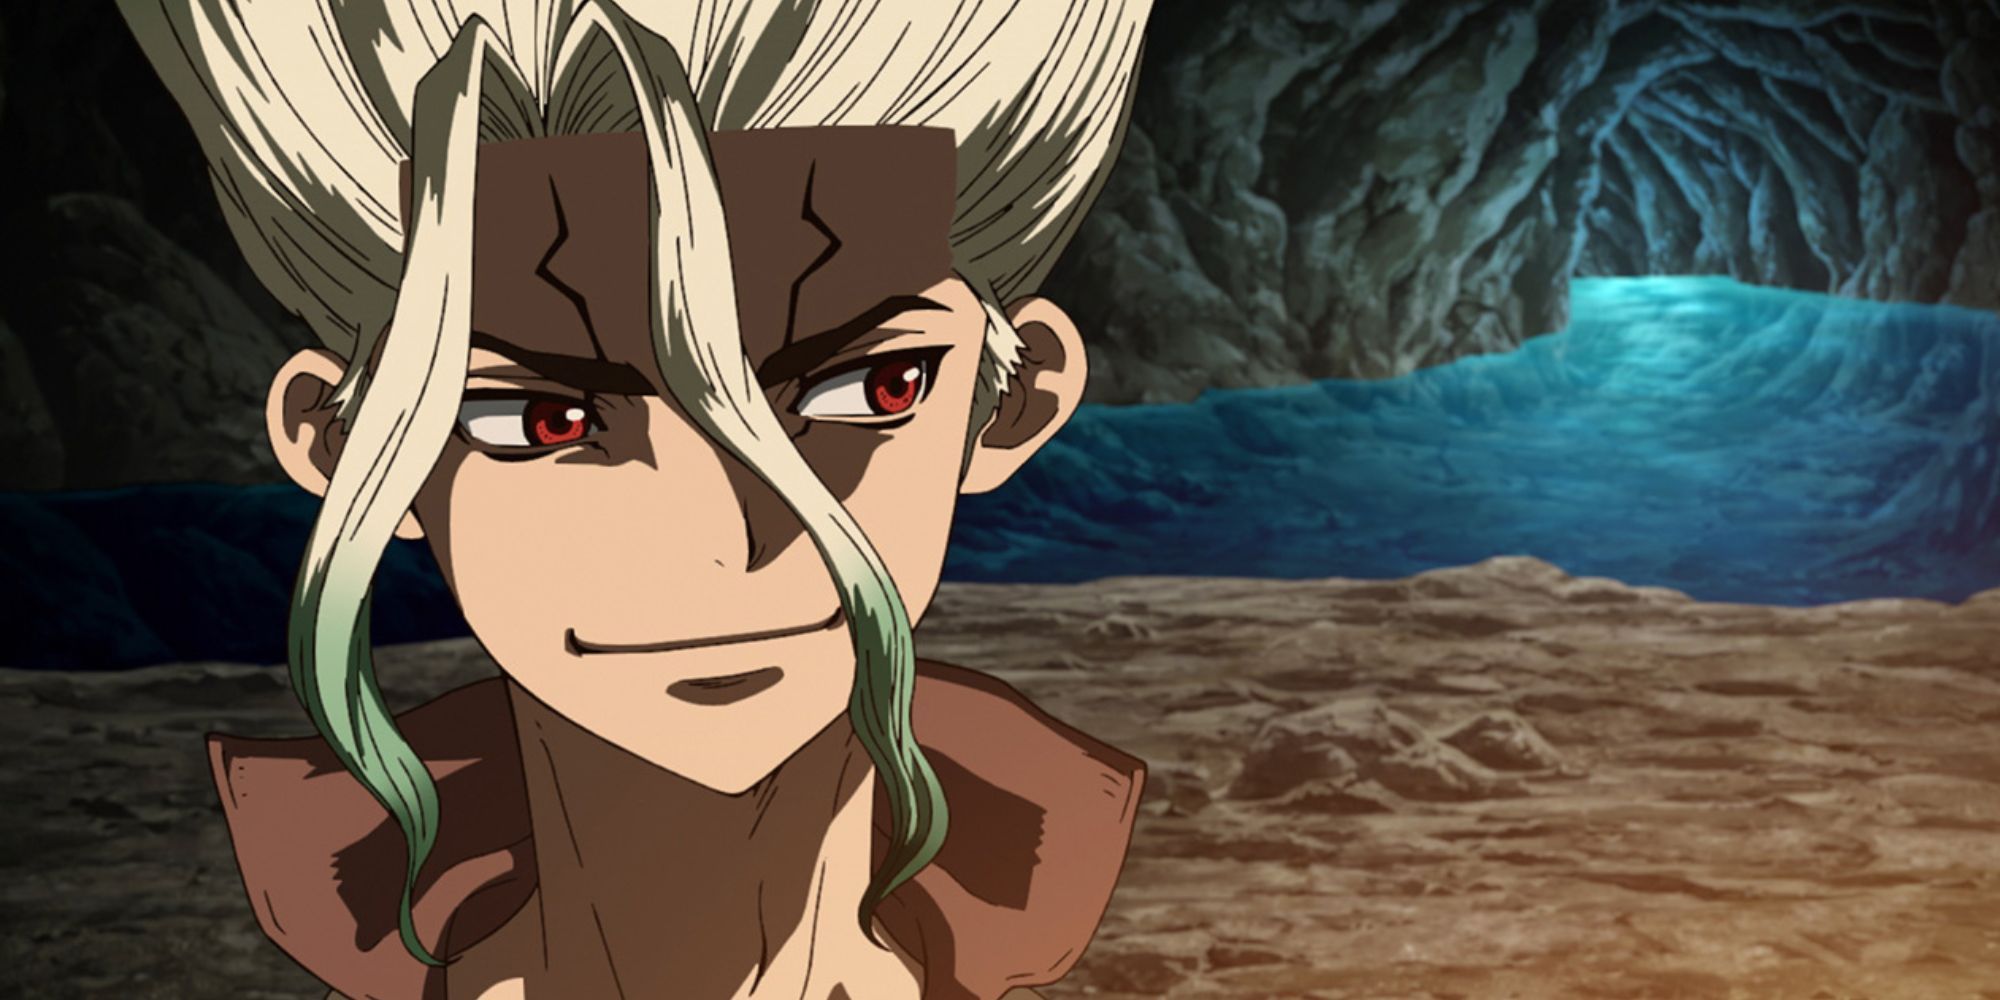 Dr. Stone Season 3 Episode 12 Release Date & Time